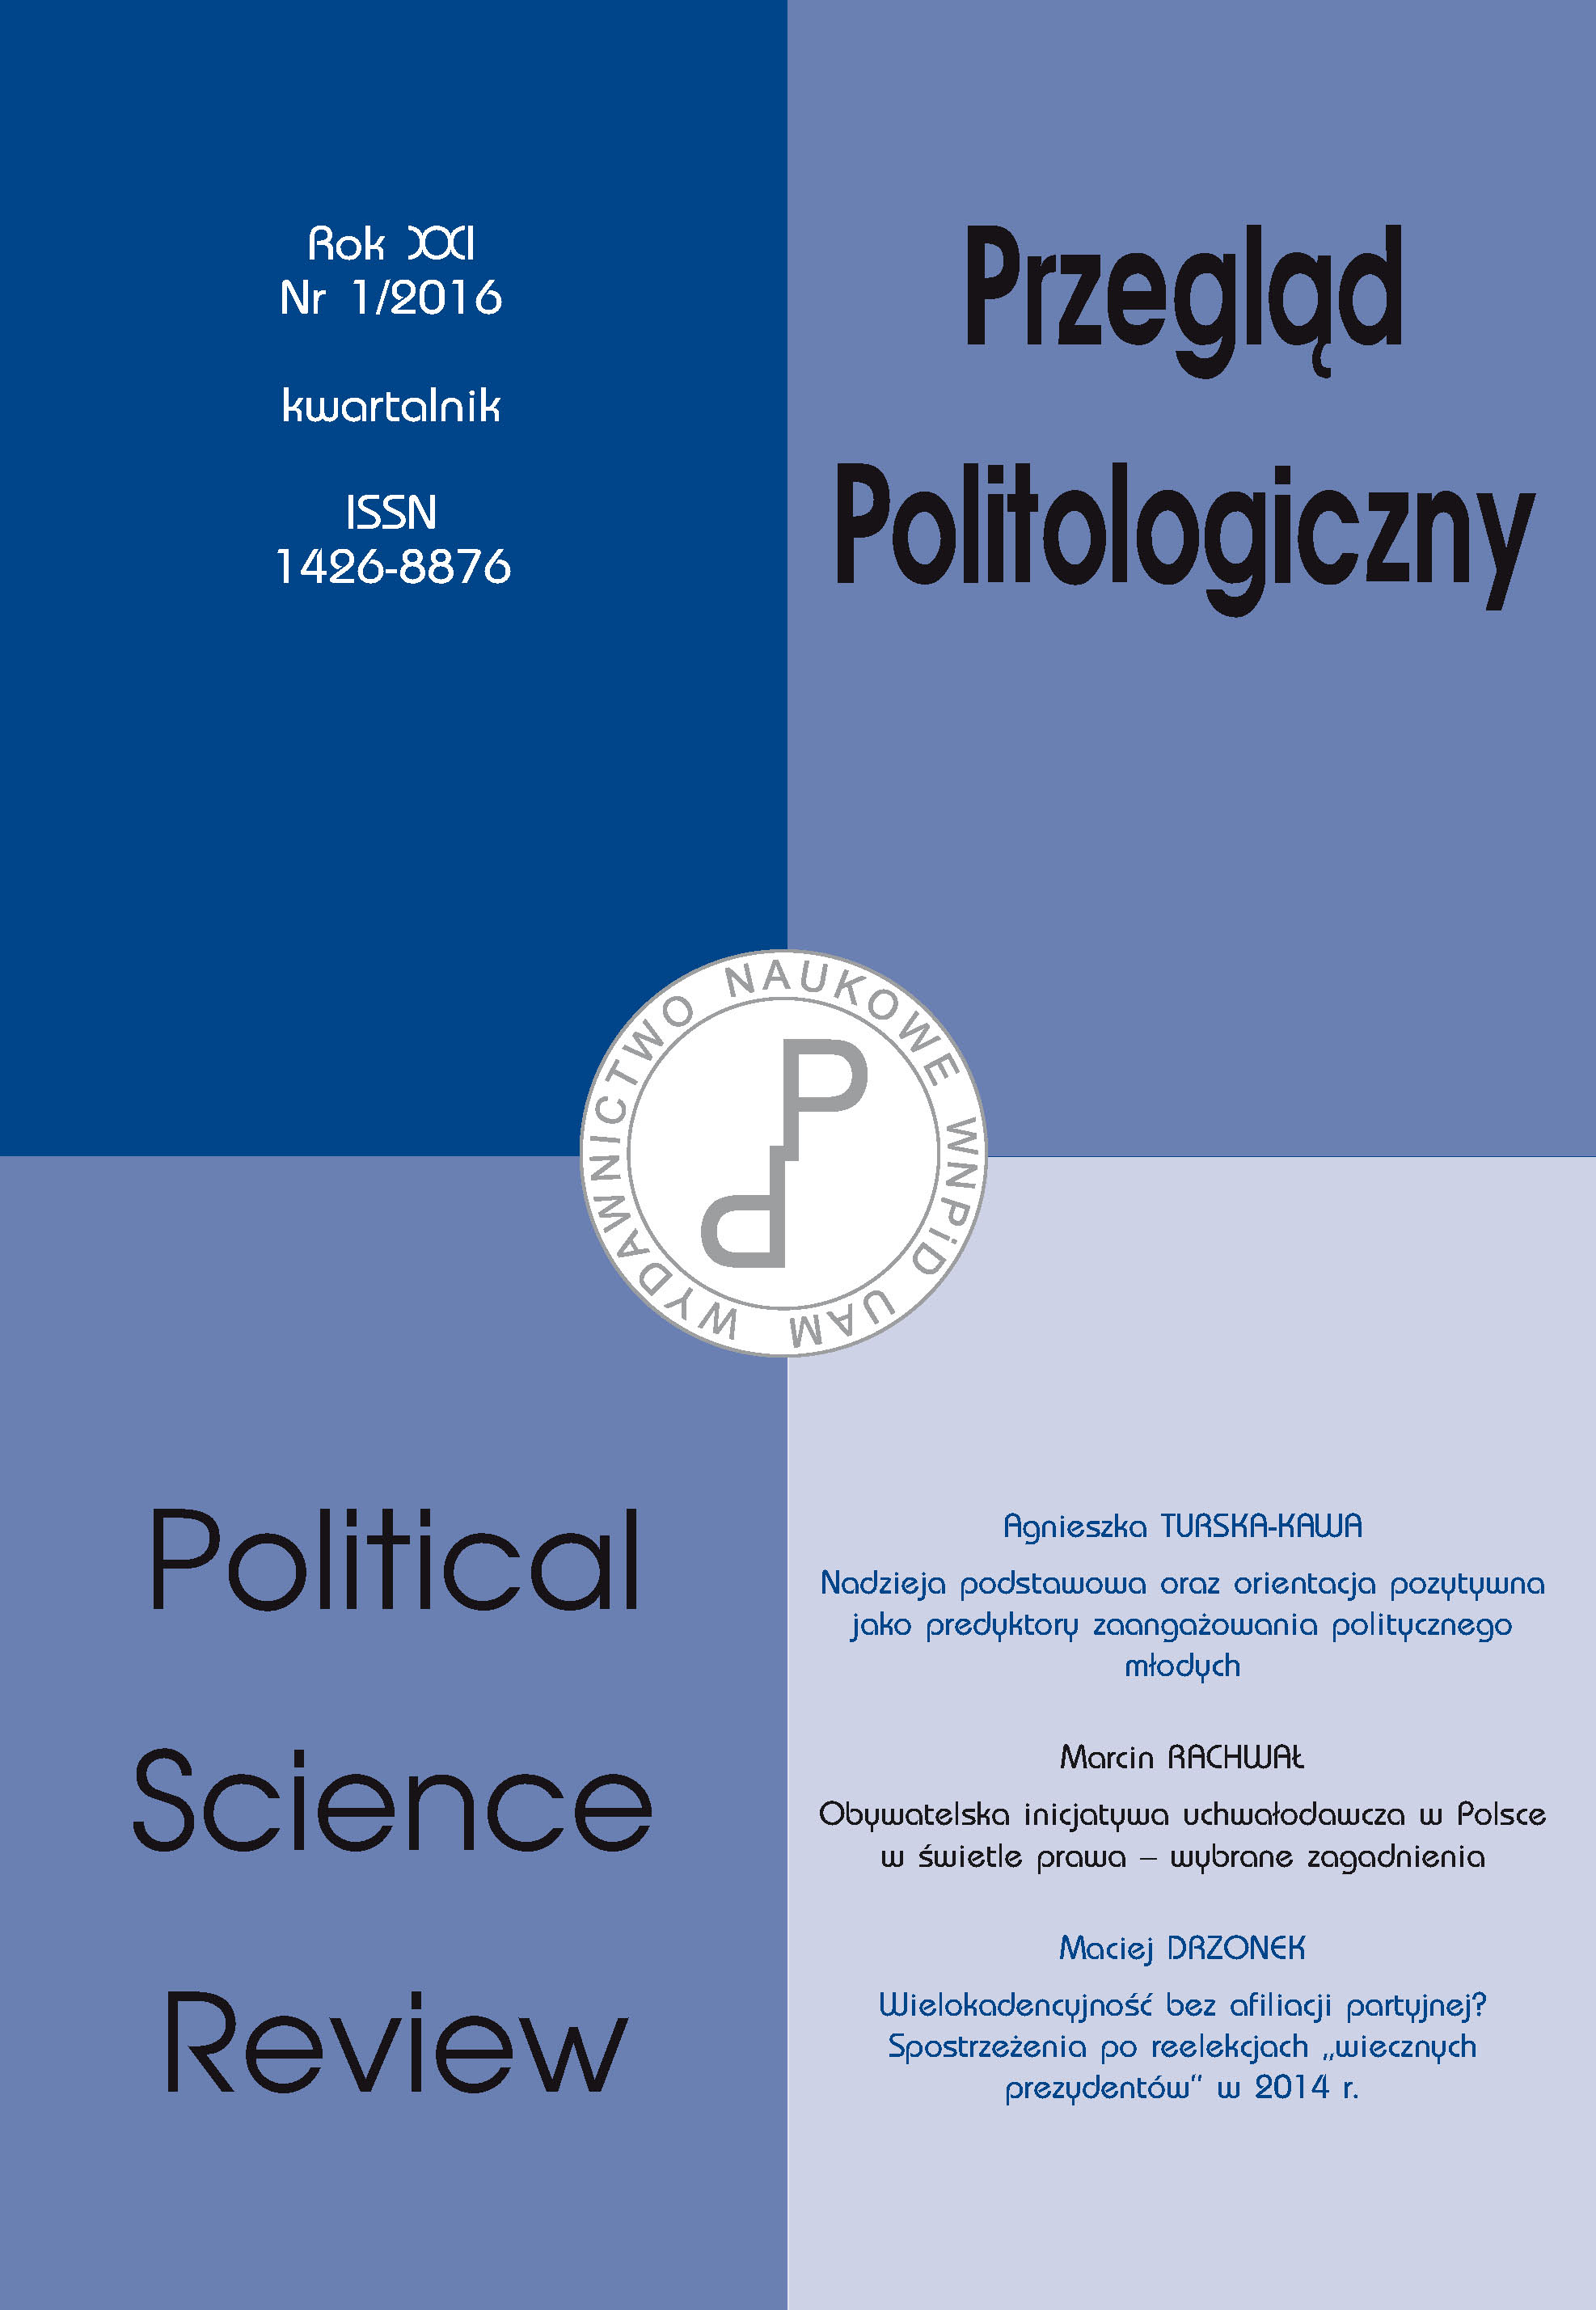 Sports policies as a result of political confrontation between states Cover Image